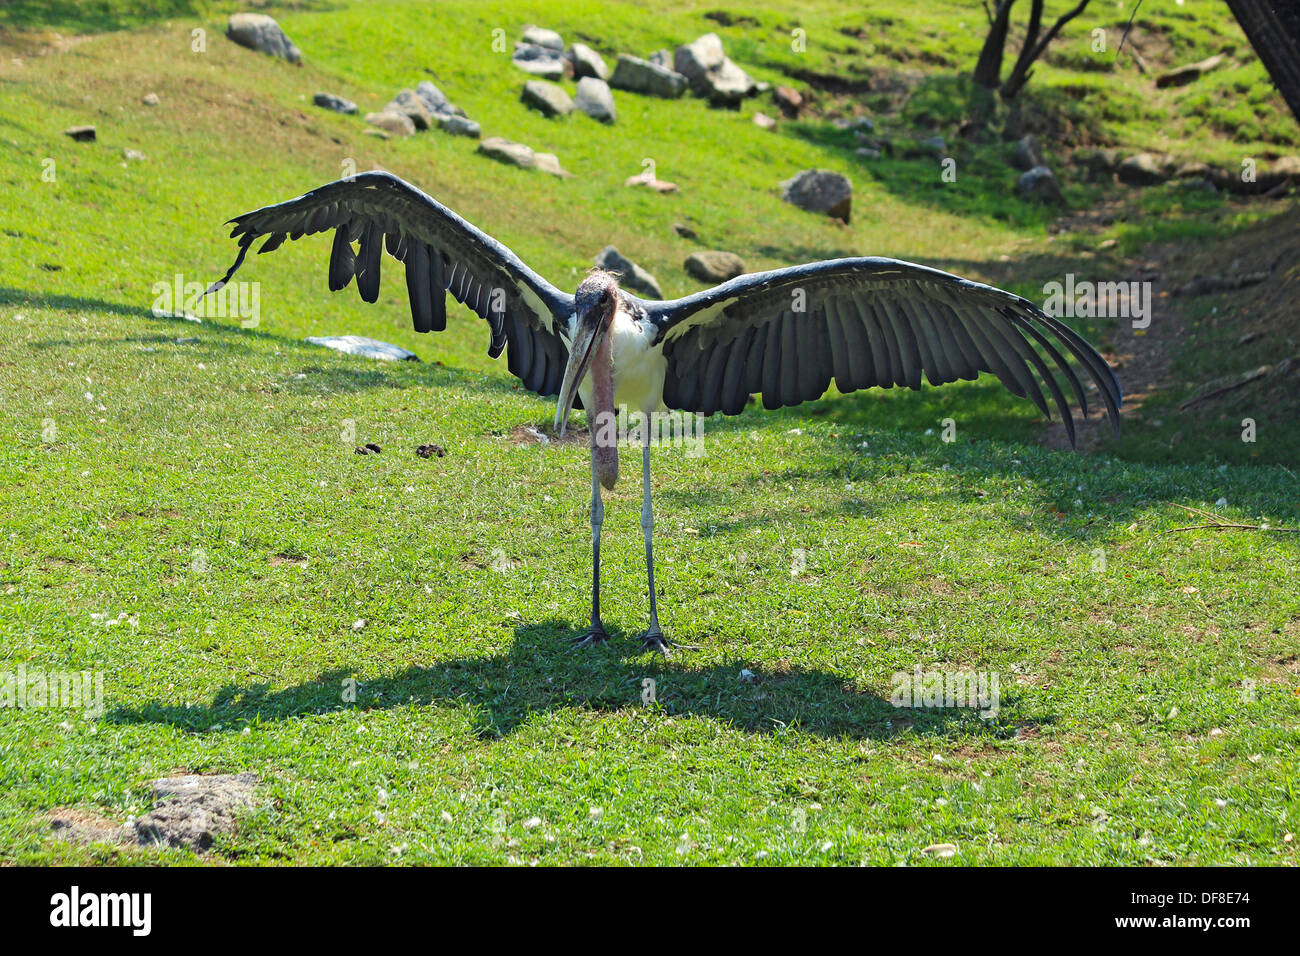 Marabou stork spreads its wings at the Indianapolis Zoo Stock Photo